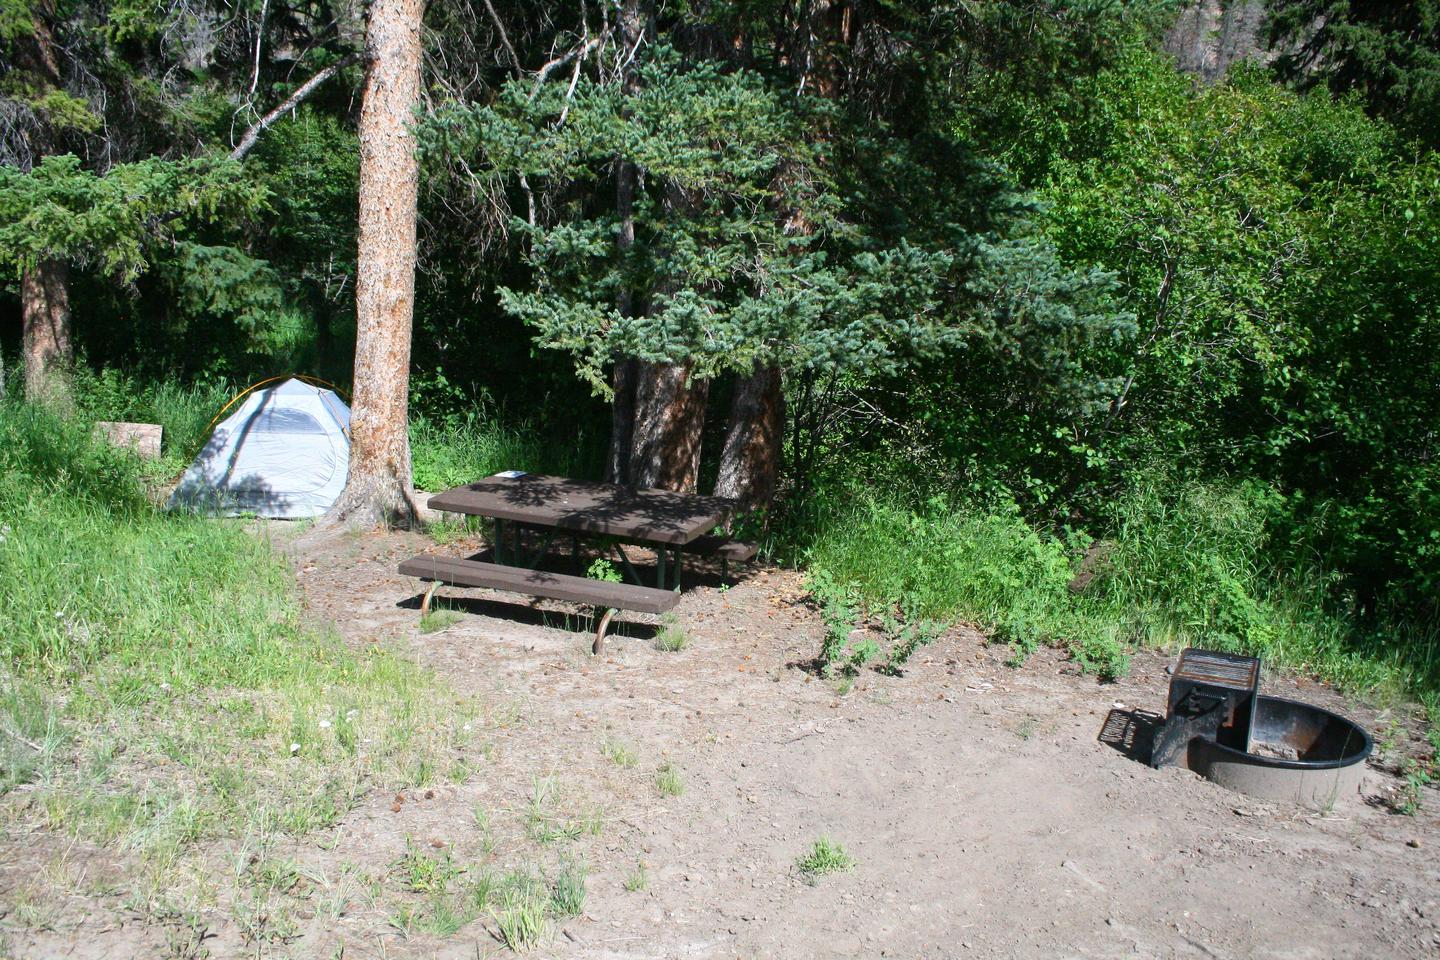 Slough Creek Campground Site #9.Slough Creek Campground Site #9